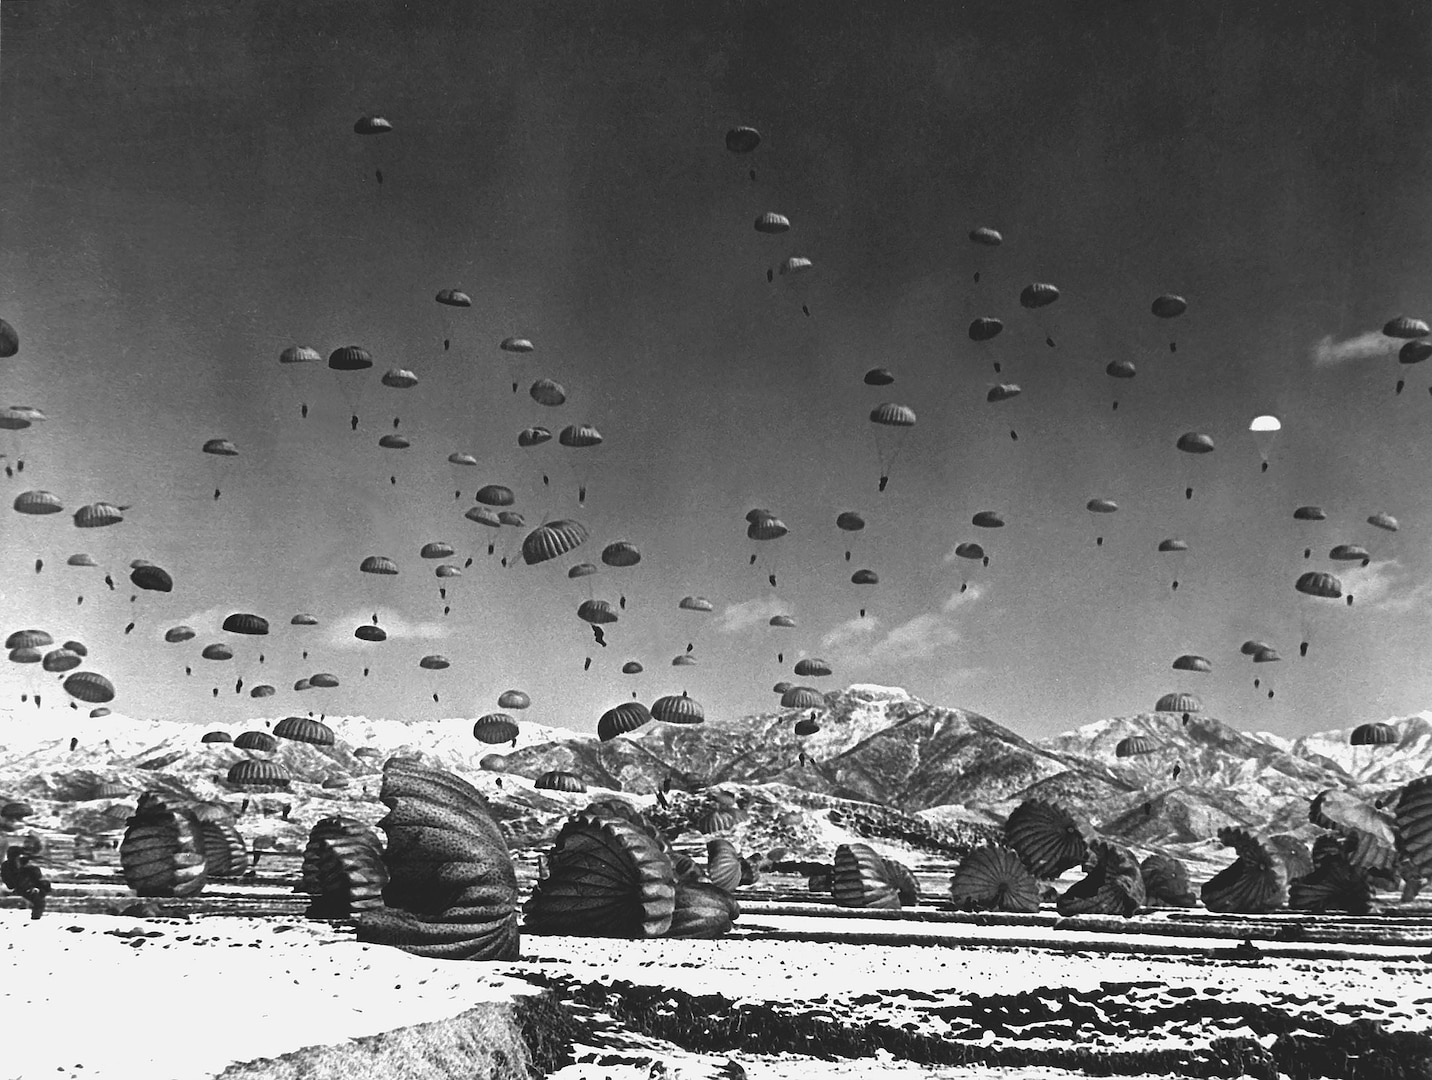 Men and equipment parachute to ground in operation conducted by United Nations airborne units, ca. 1951